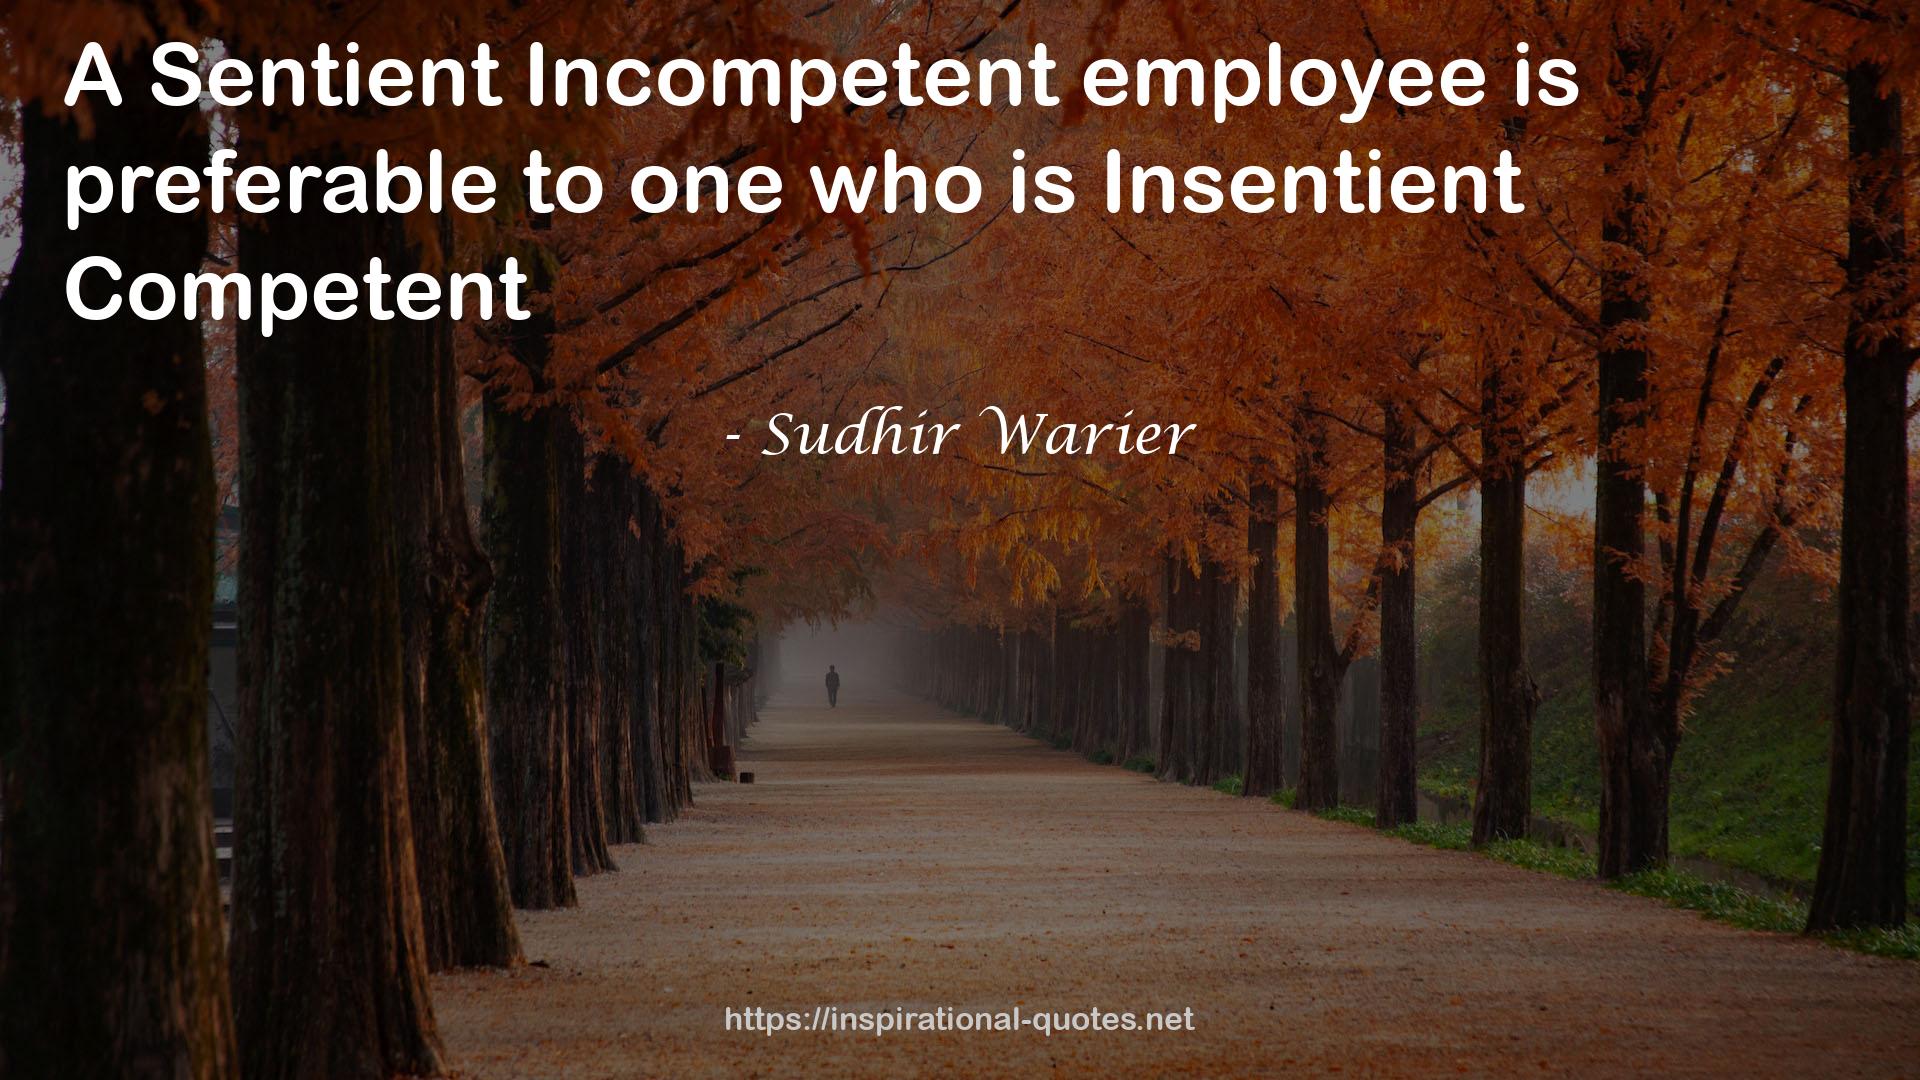 Sudhir Warier QUOTES